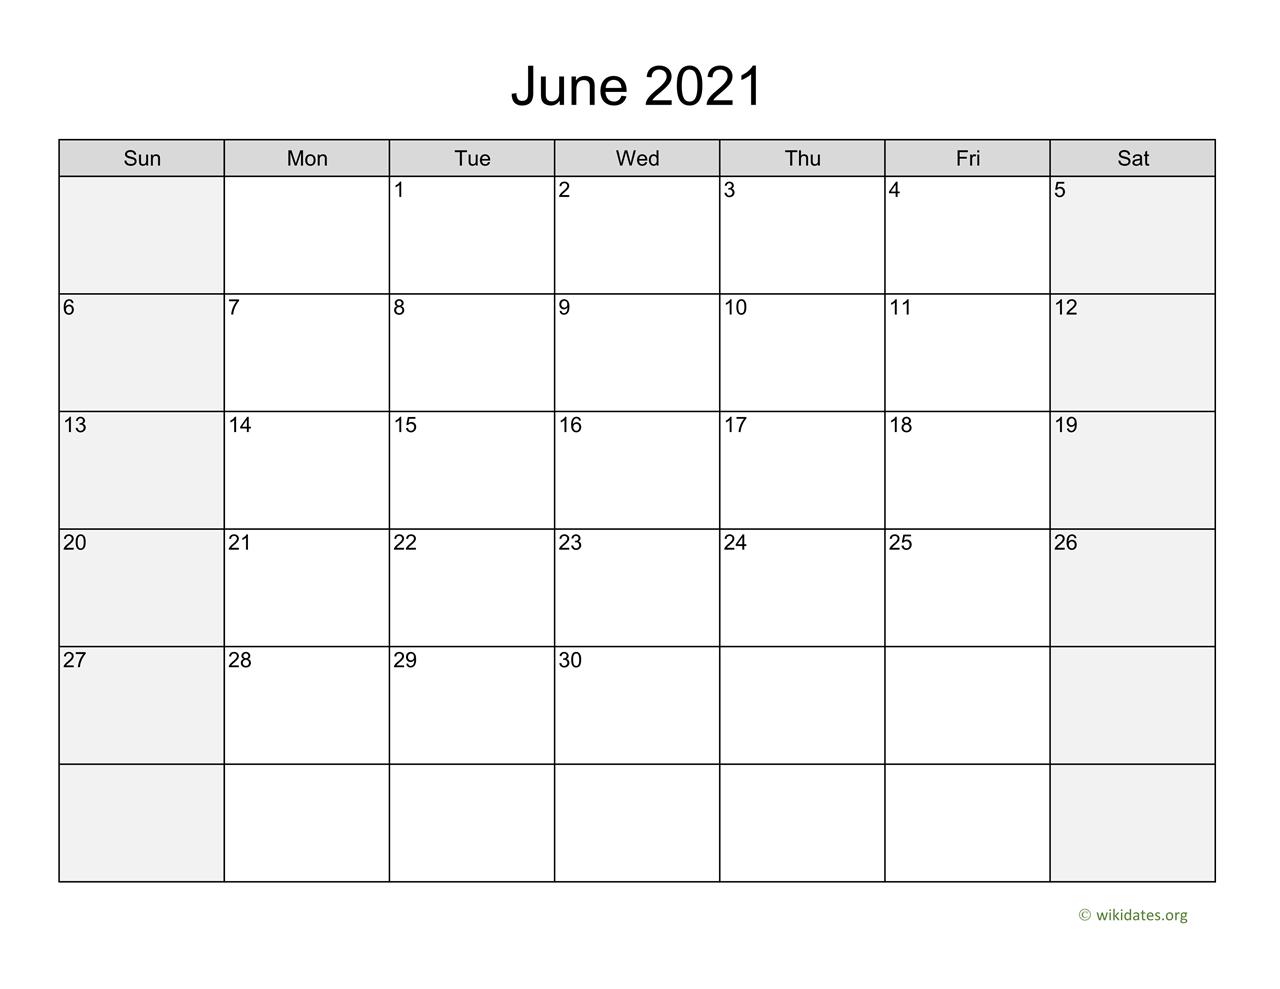 June 2021 Calendar with Weekend Shaded | WikiDates.org